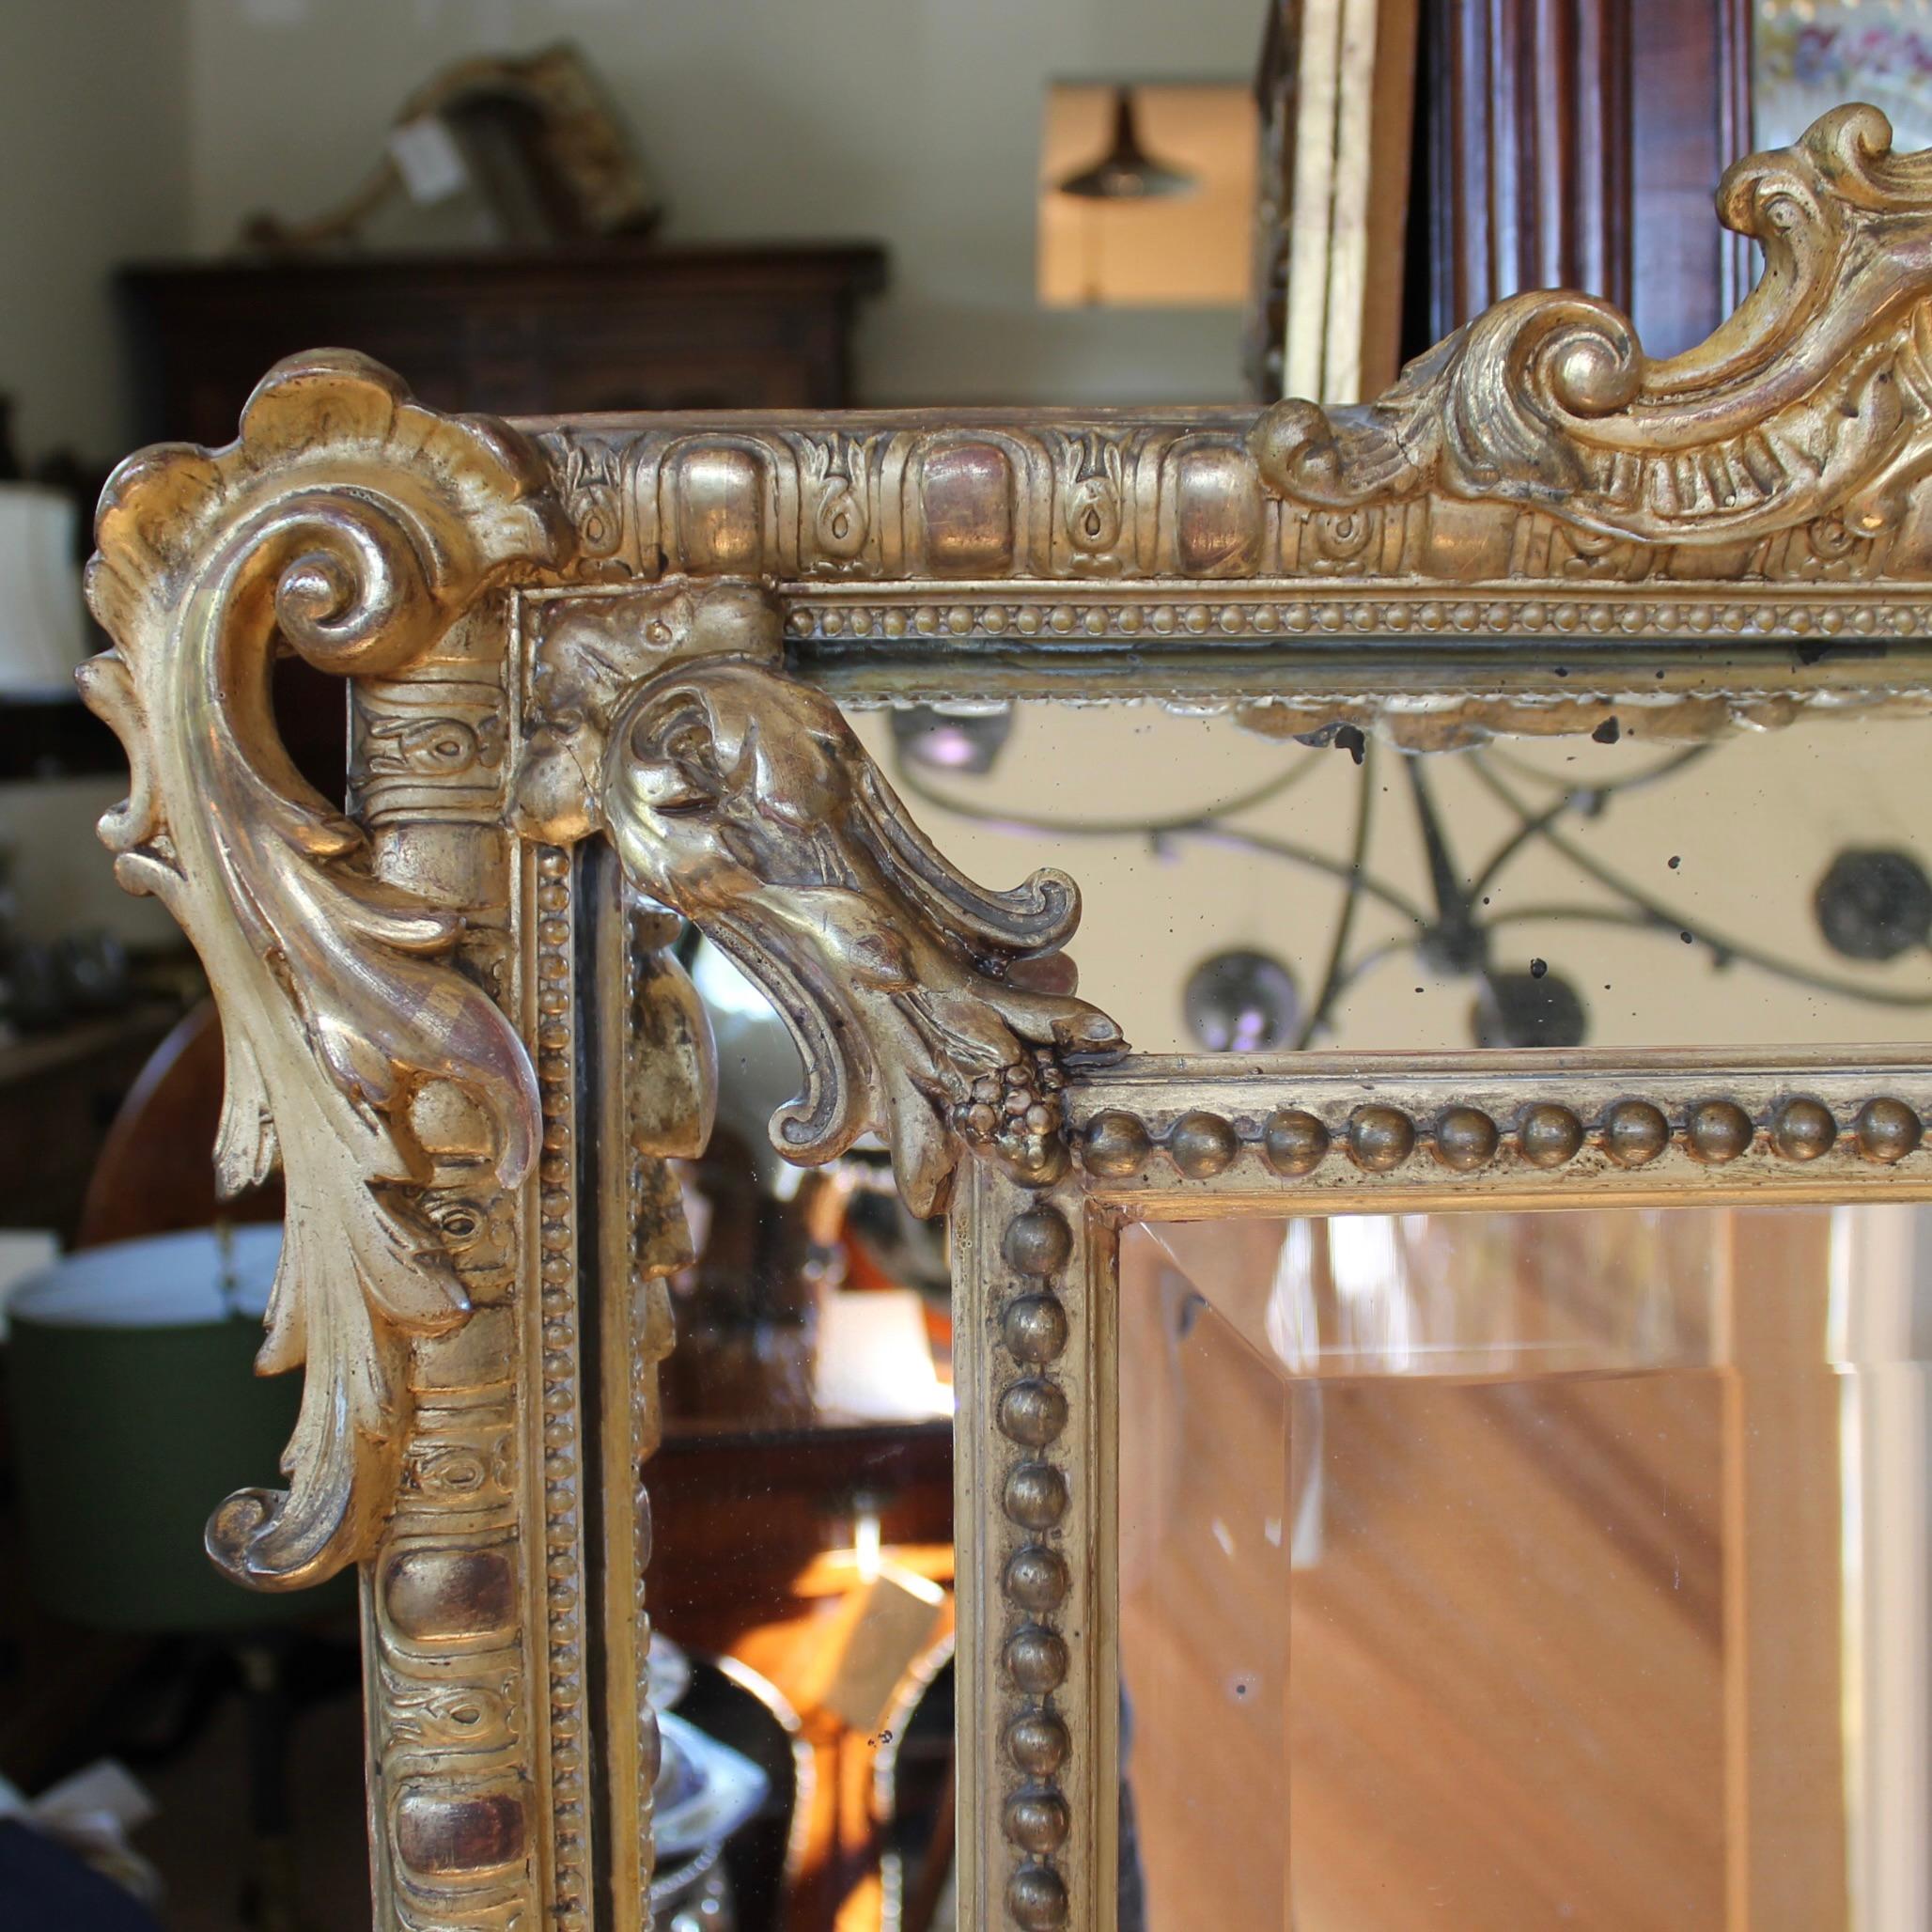 Large French Gilt Borderglass Pier Mirror with Rococo Crest, 19th Century In Good Condition For Sale In Free Union, VA